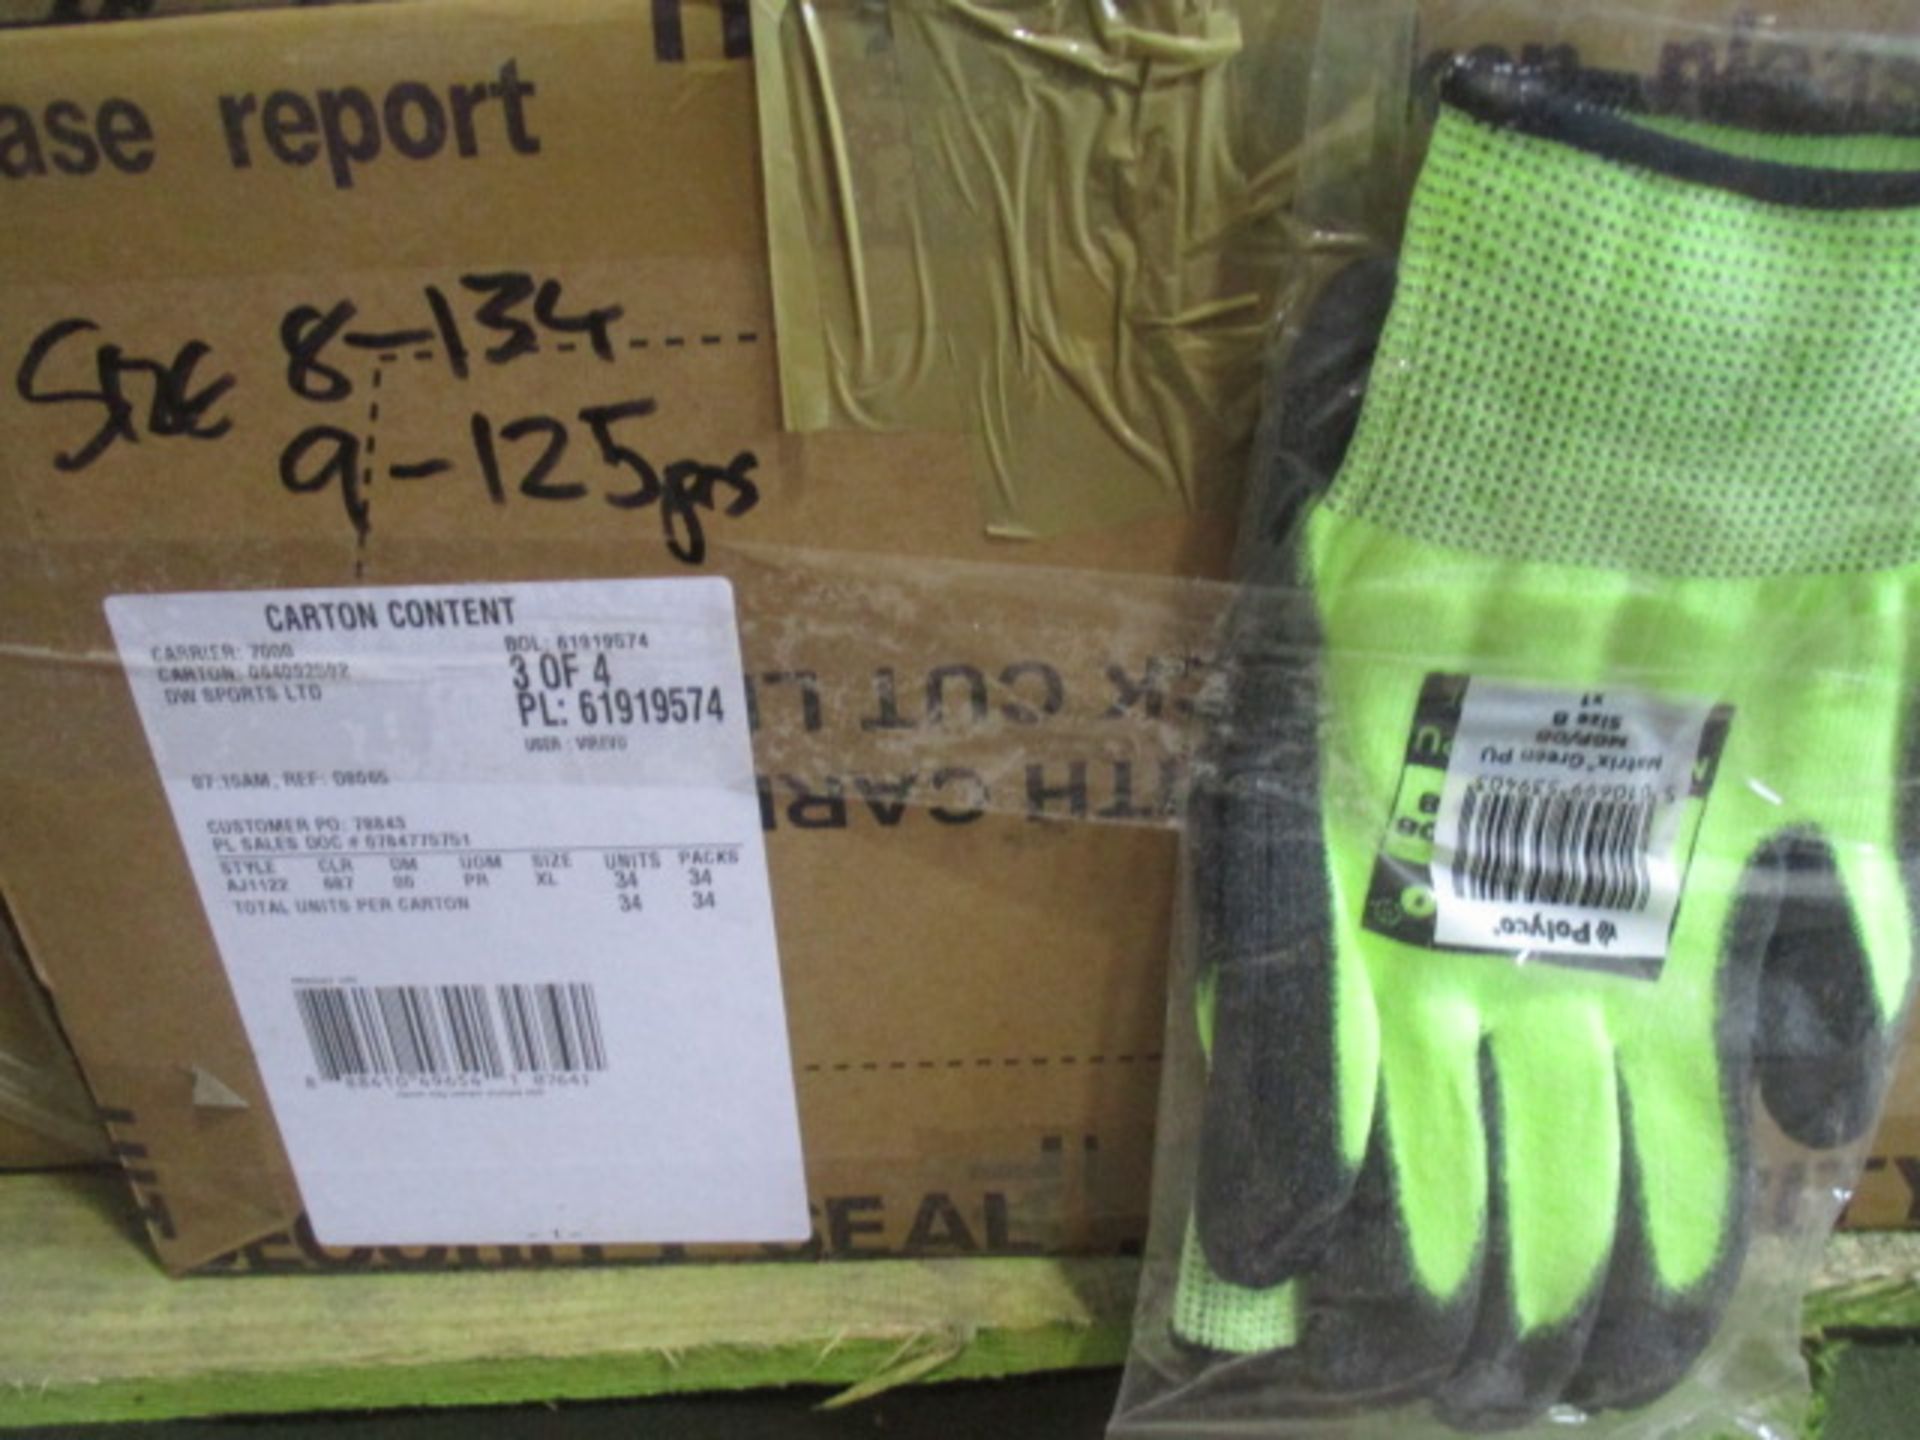 Appx 134 size 8 pairs of brand new workwear gloves